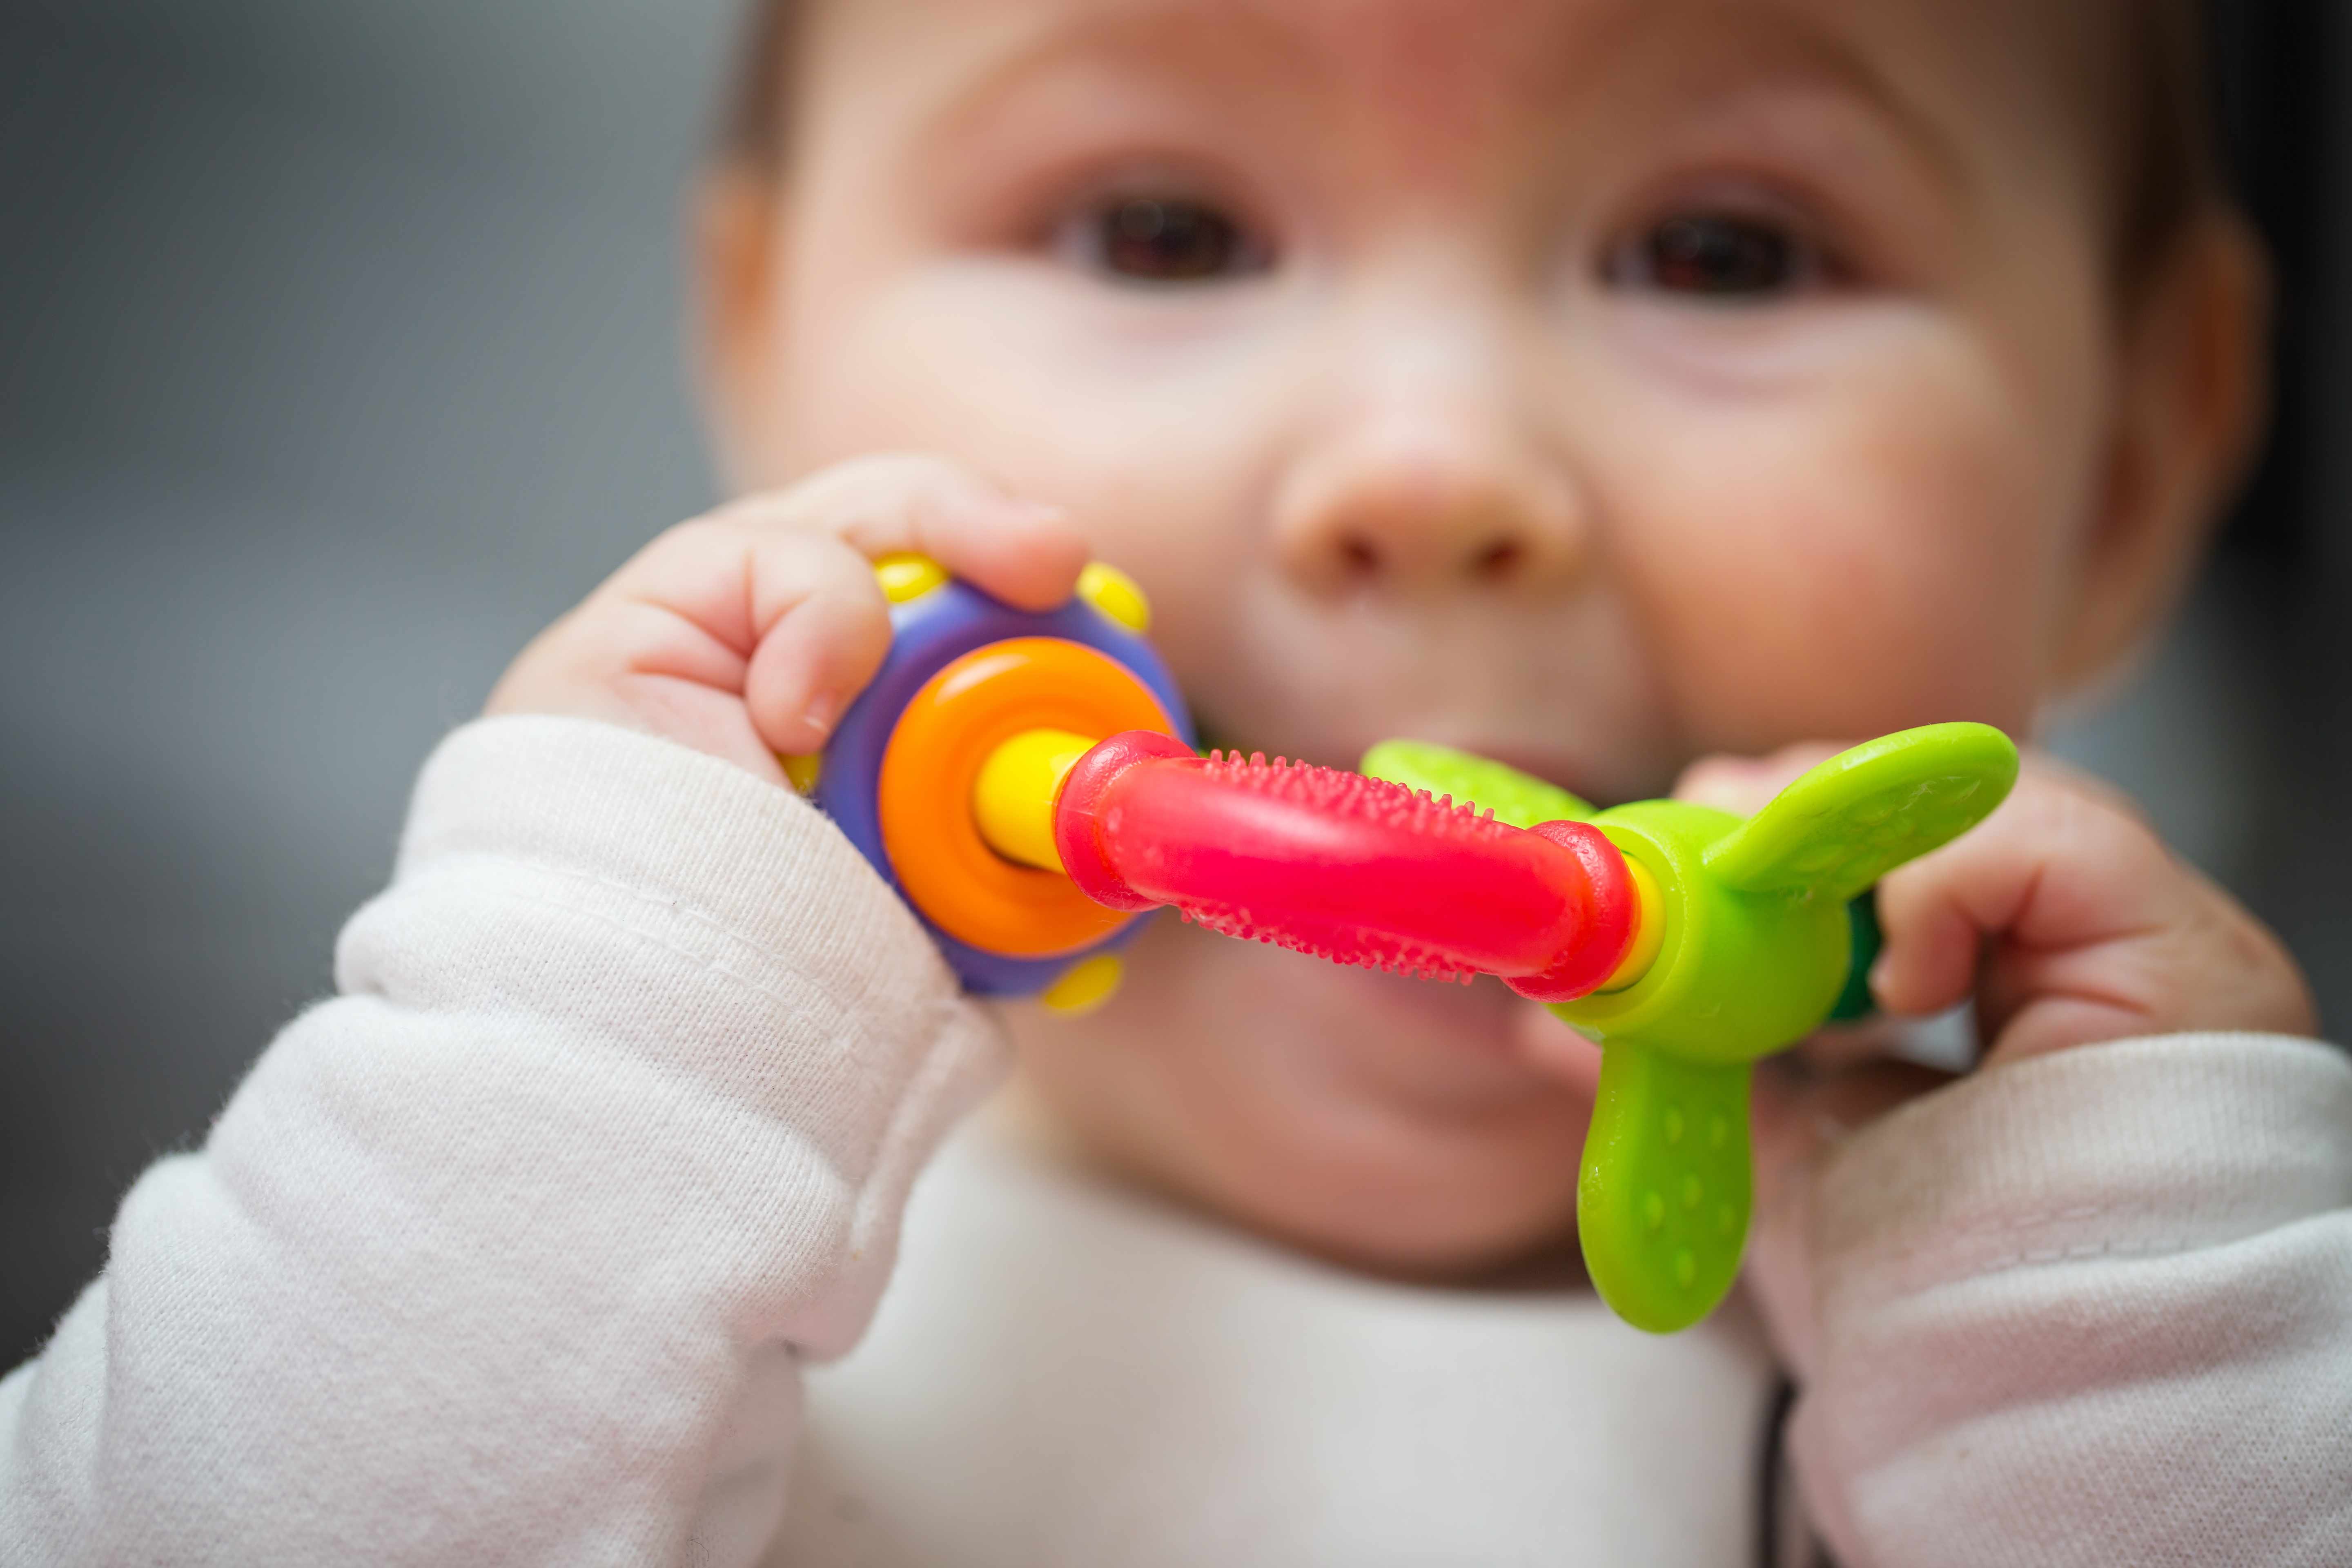 a baby chewing on a colorful teething ring